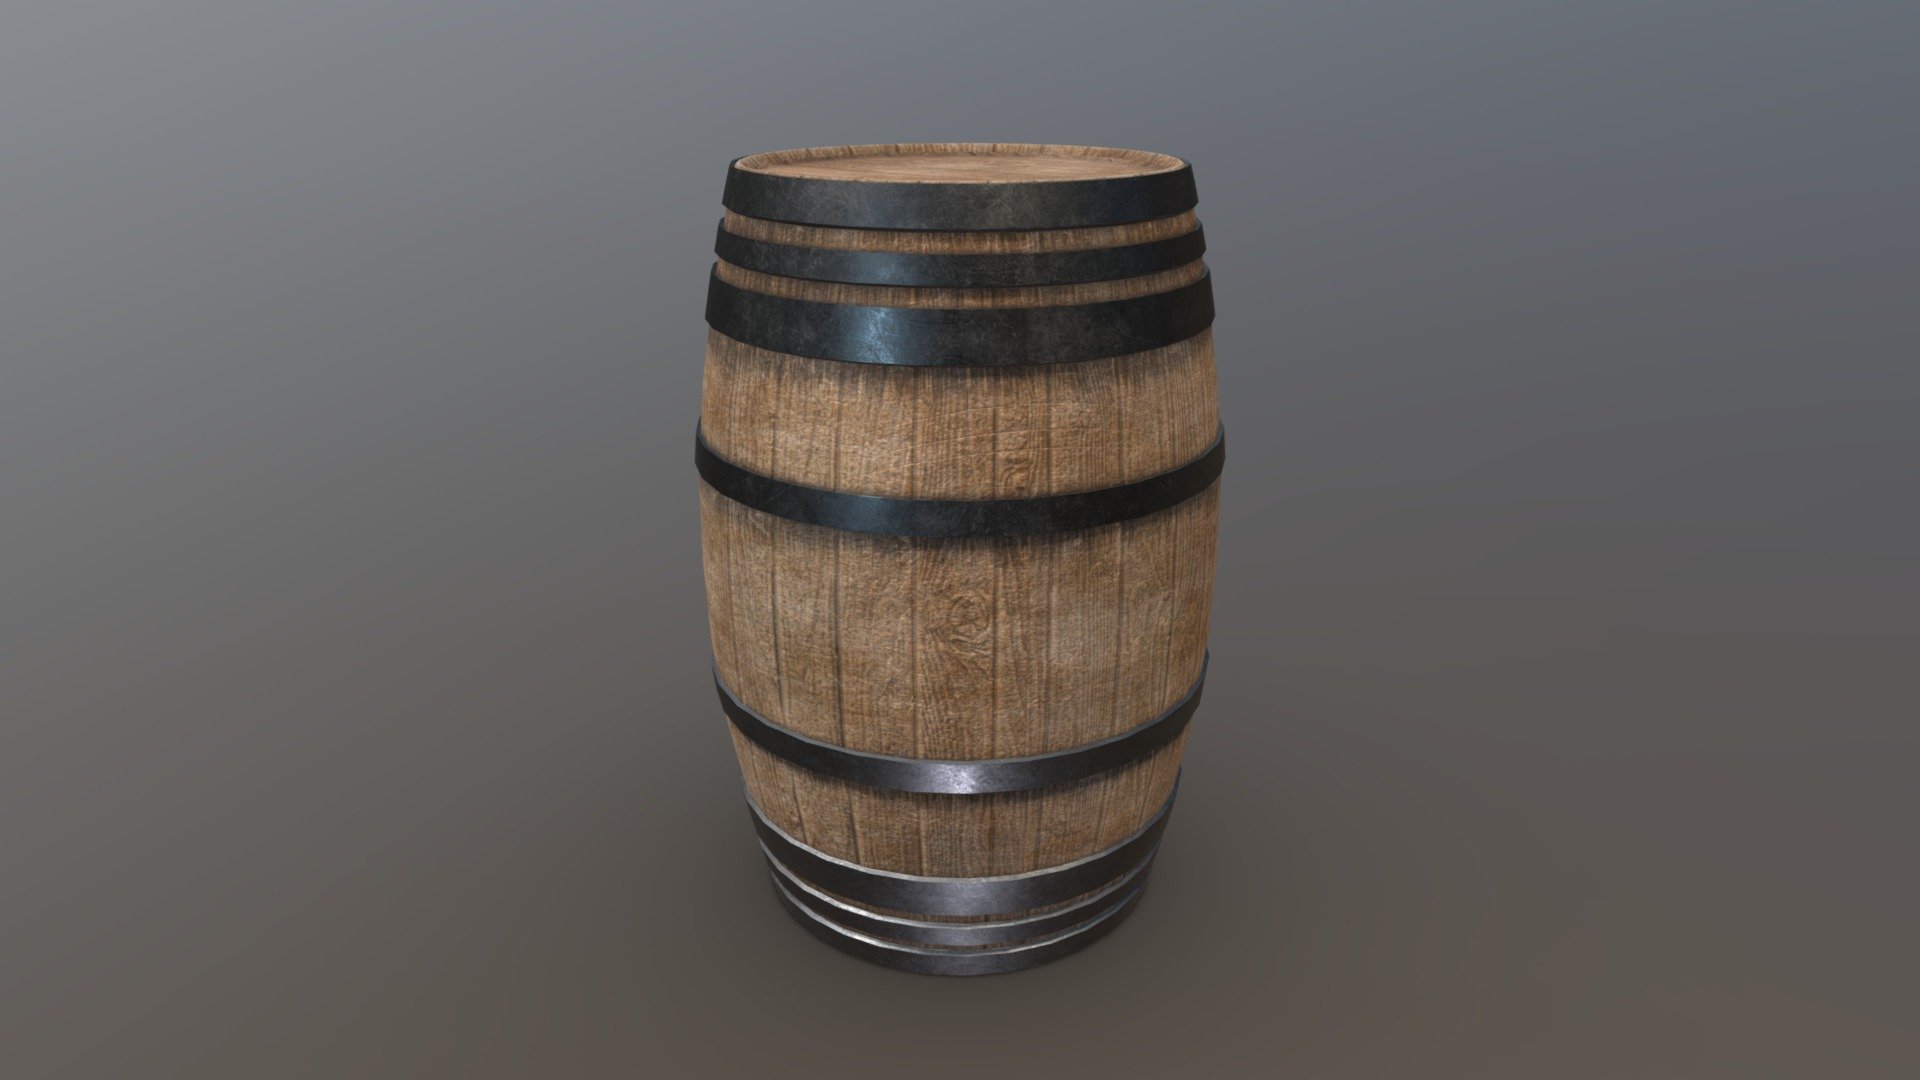 This is a wooden barrel made for old environments as wine containers or in pirate scenes - Old Wooden Barrel - 3D model by IPfuentes 3d model